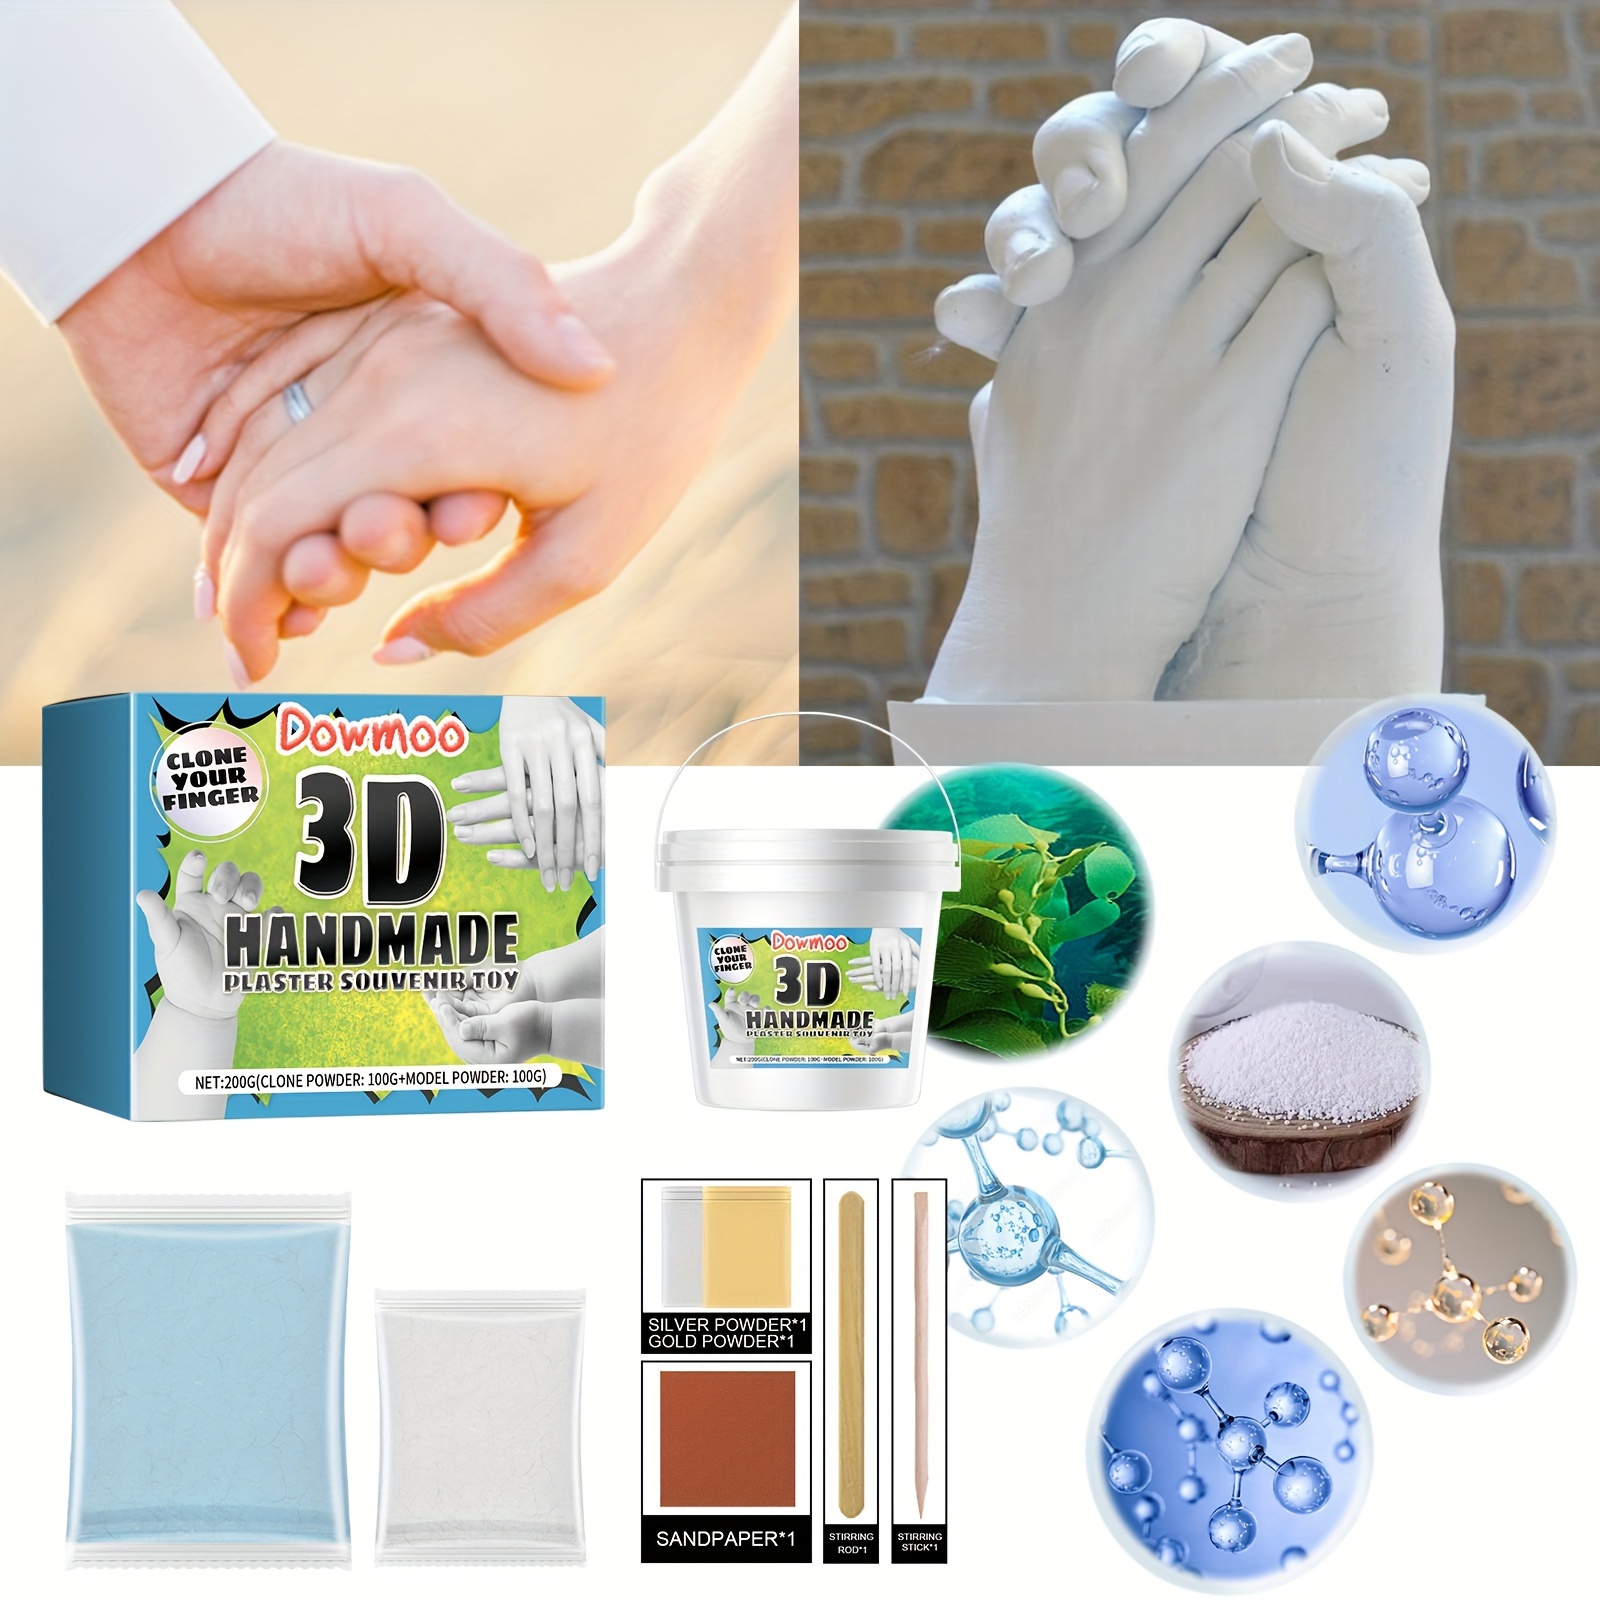 

3d Clone Powder Hand Casting Kit - Diy Keepsake Hand Mold Craft Set, Unique Wedding Anniversary Gift, Perfect For Family Friends - Includes Molding Powder, Plaster, Sandpaper & Instructions